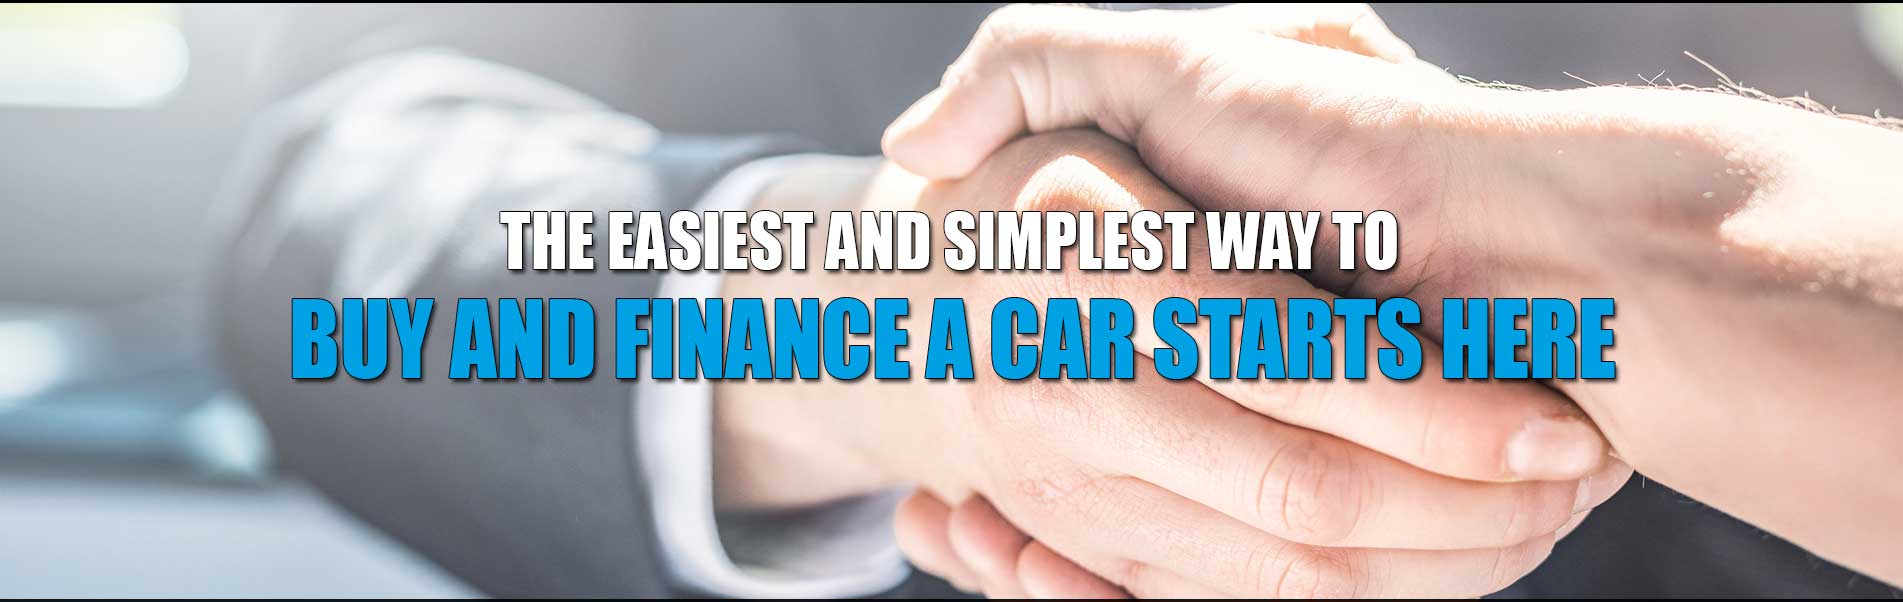 Used cars for sale in Saint James | USA Auto Find. Saint James New York